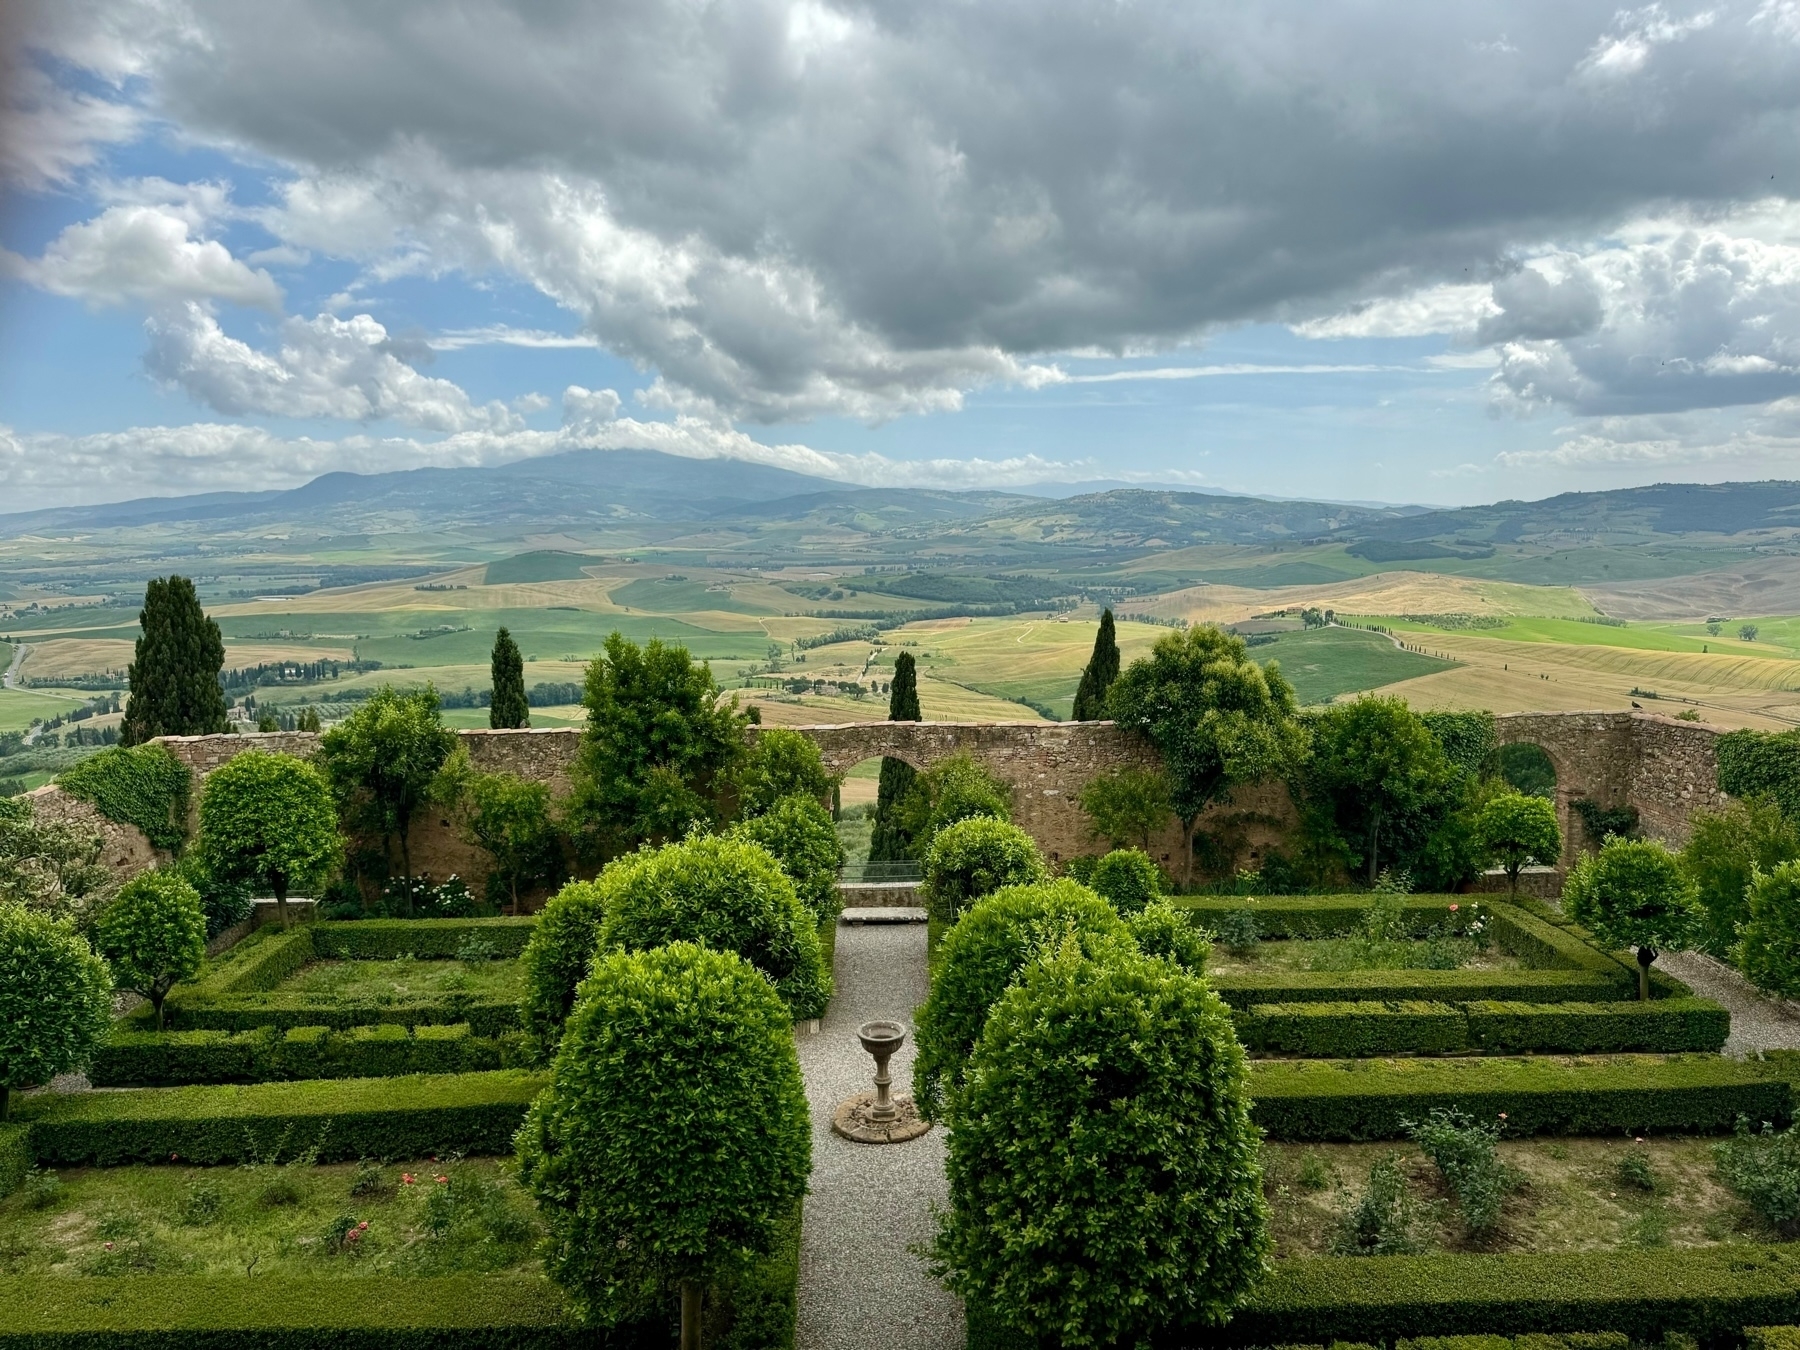 A picturesque landscape featuring a well-manicured formal garden with neatly trimmed bushes and hedges. Beyond the garden, there is an old stone wall partially overgrown with greenery. The backdrop showcases rolling hills, fields, and distant mountains. 